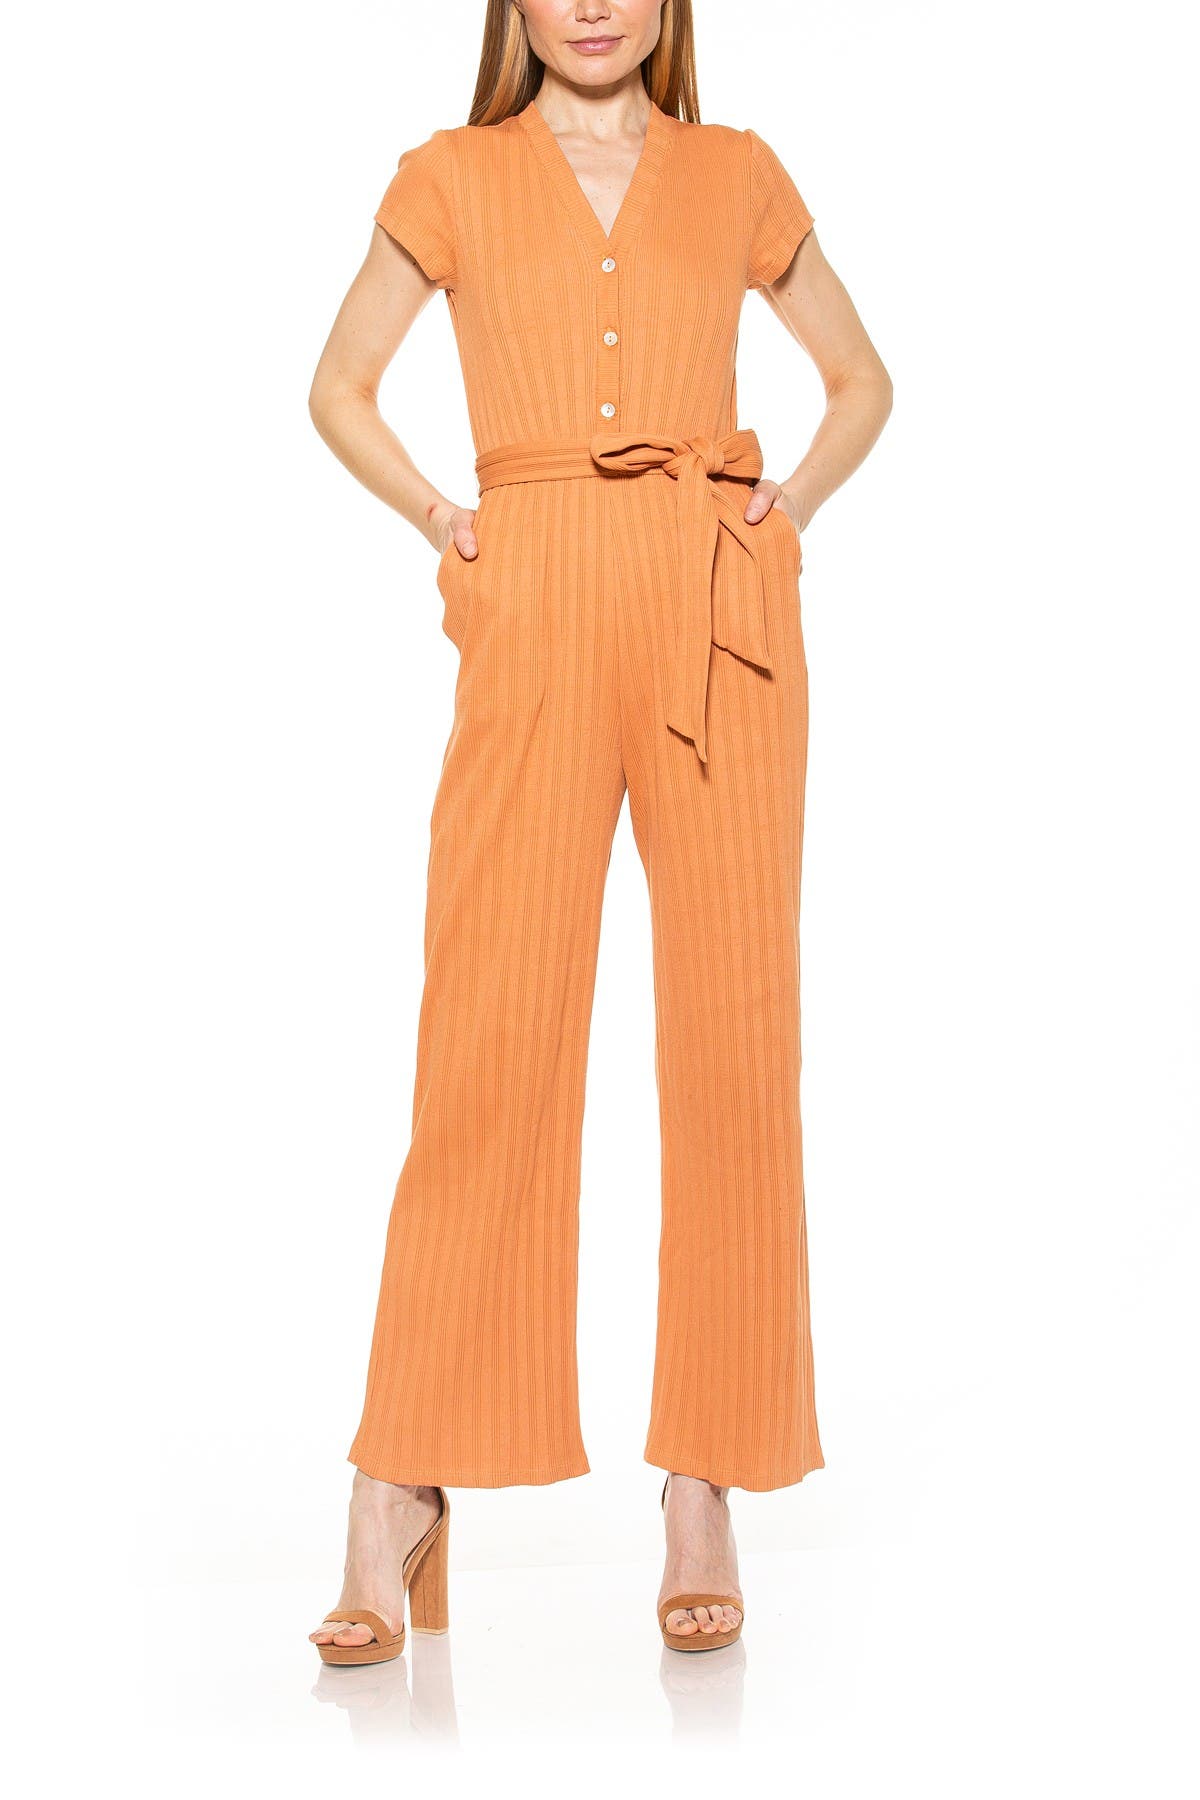 Alexia Admor Ezra Ribbed Button Down Straight Leg Jumpsuit In Caf